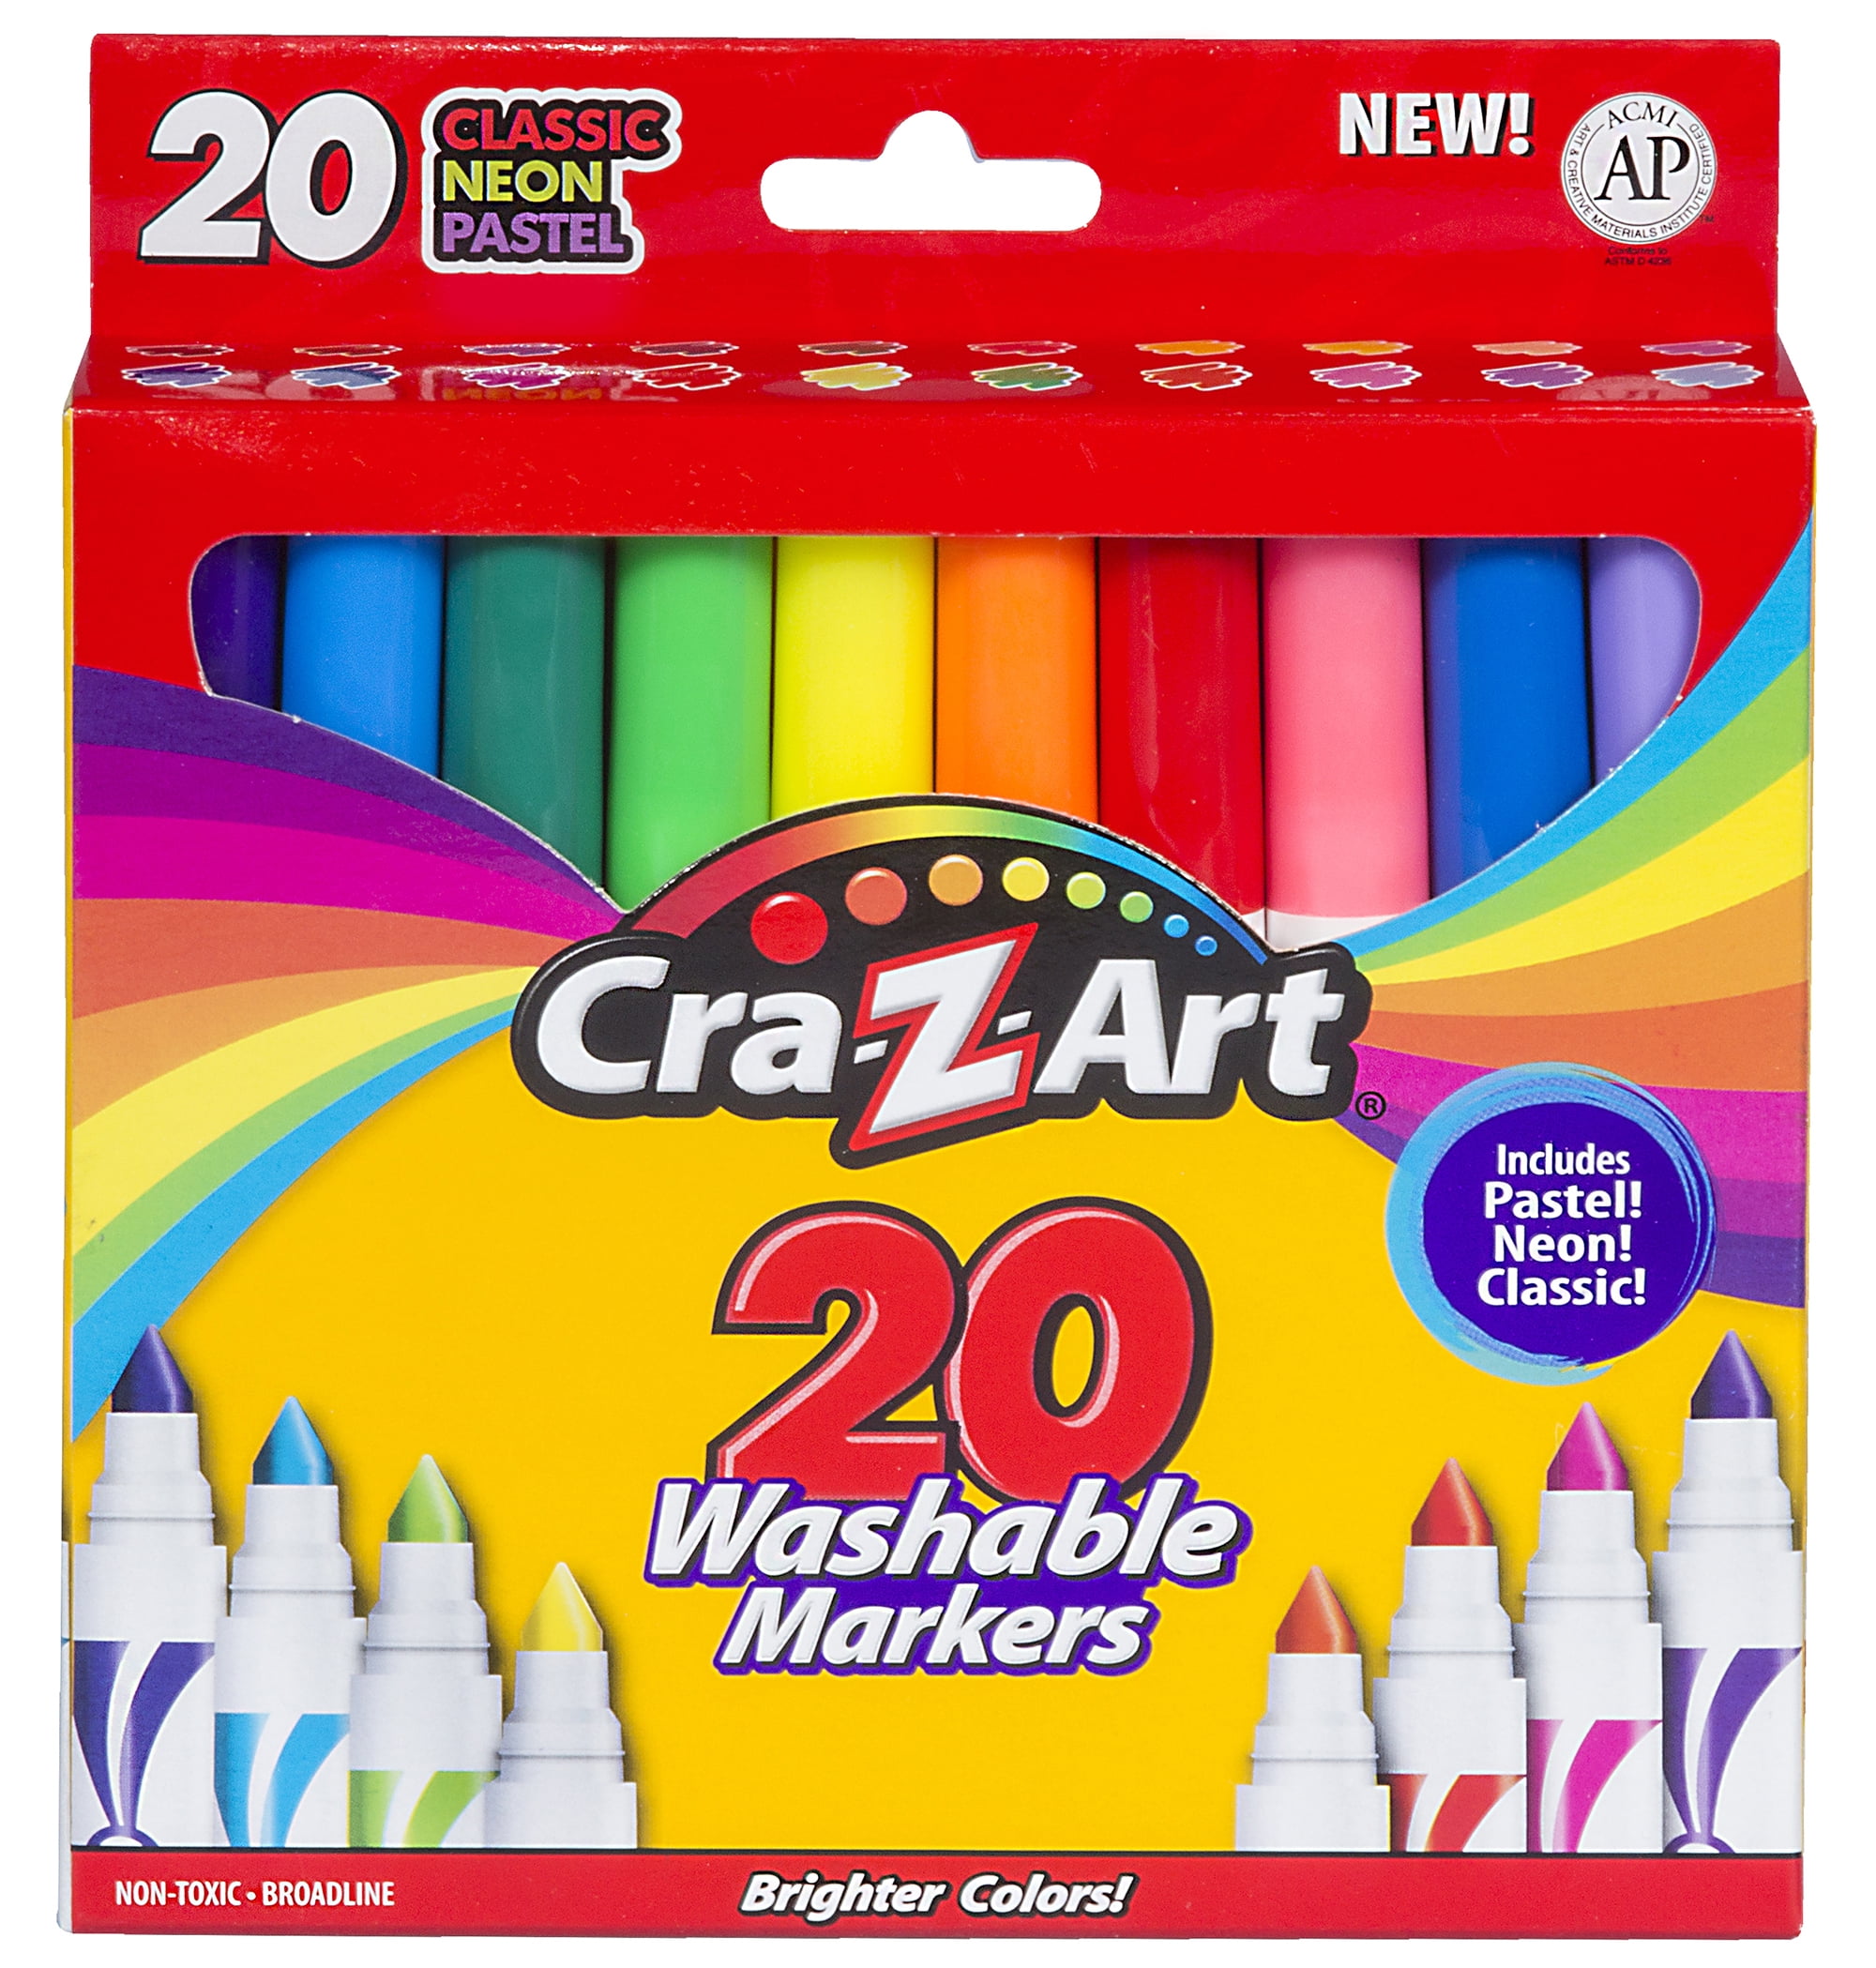 Fabric Markers Bright Value Pack – Colortime Crafts and Markers